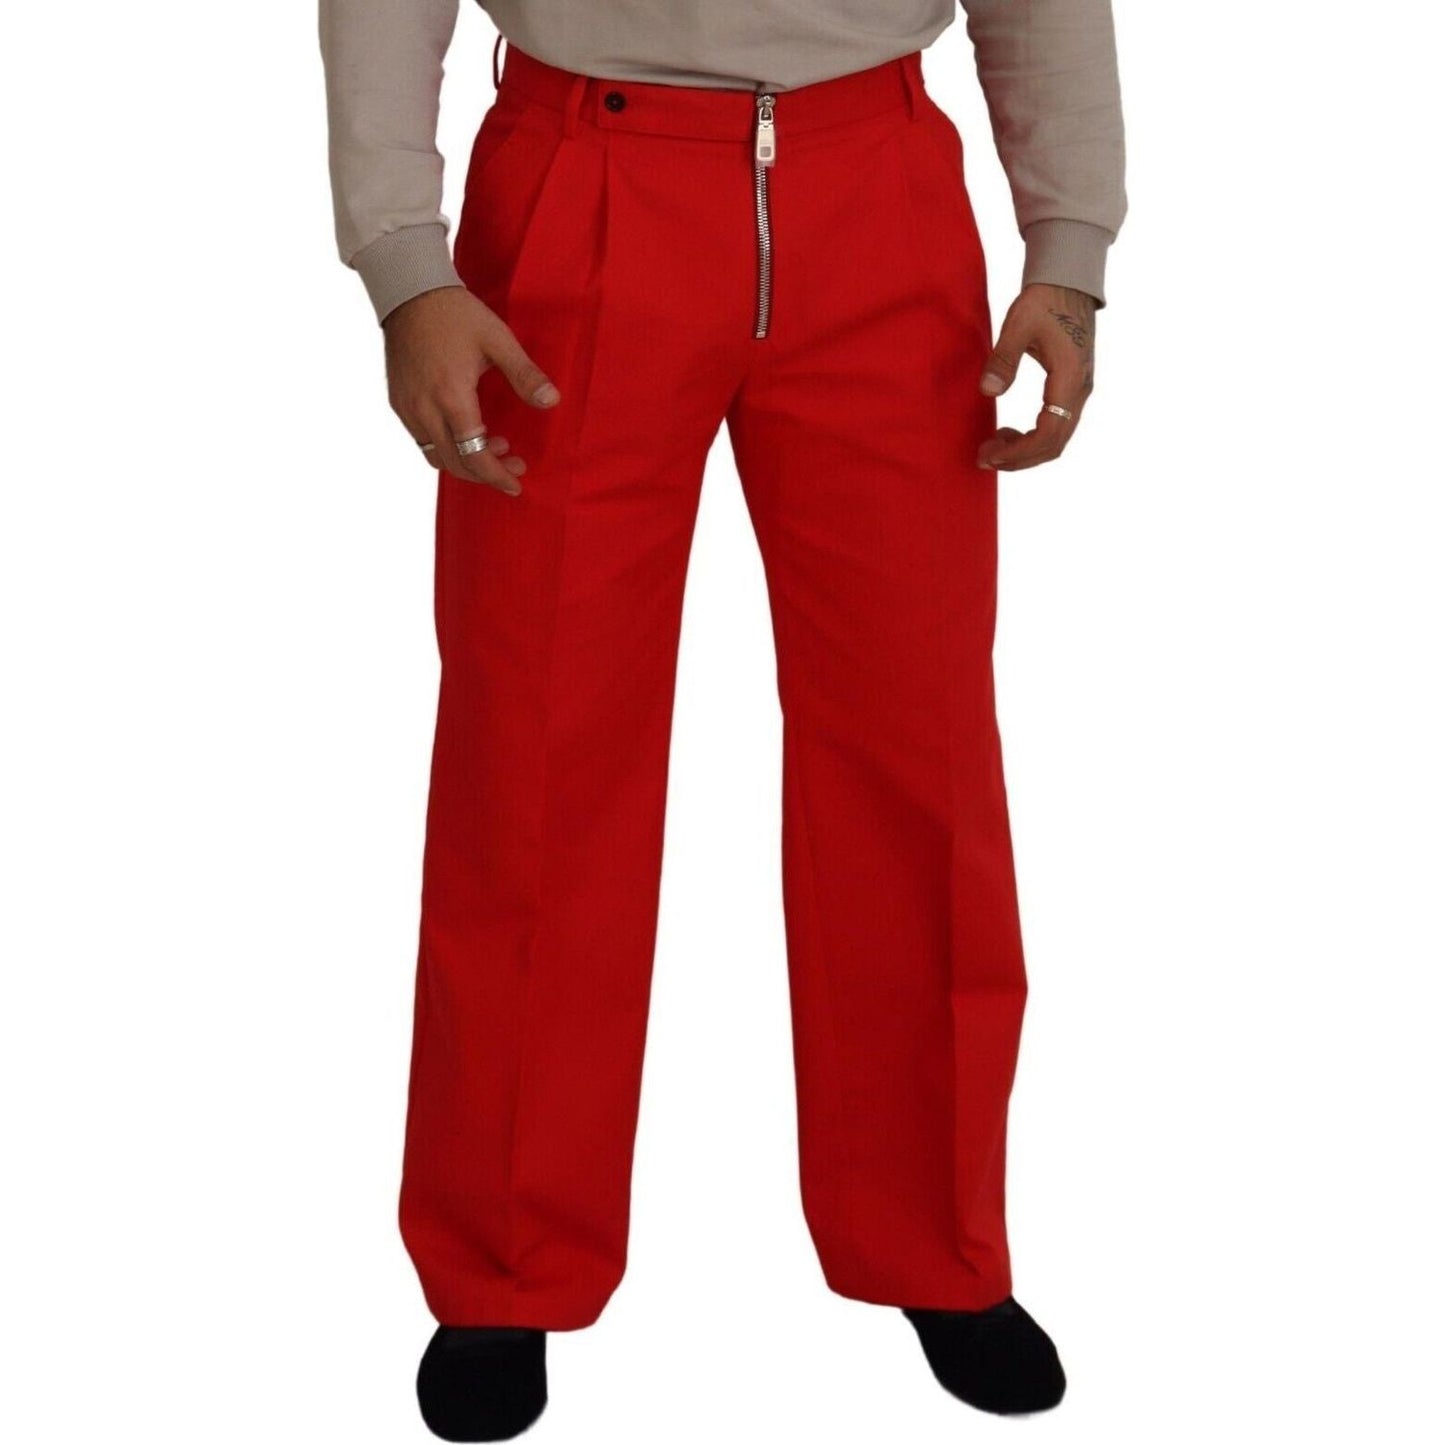 Dolce & Gabbana Stunning Red Mainline Cotton Pants red-straight-fit-men-trousers-cotton-pants